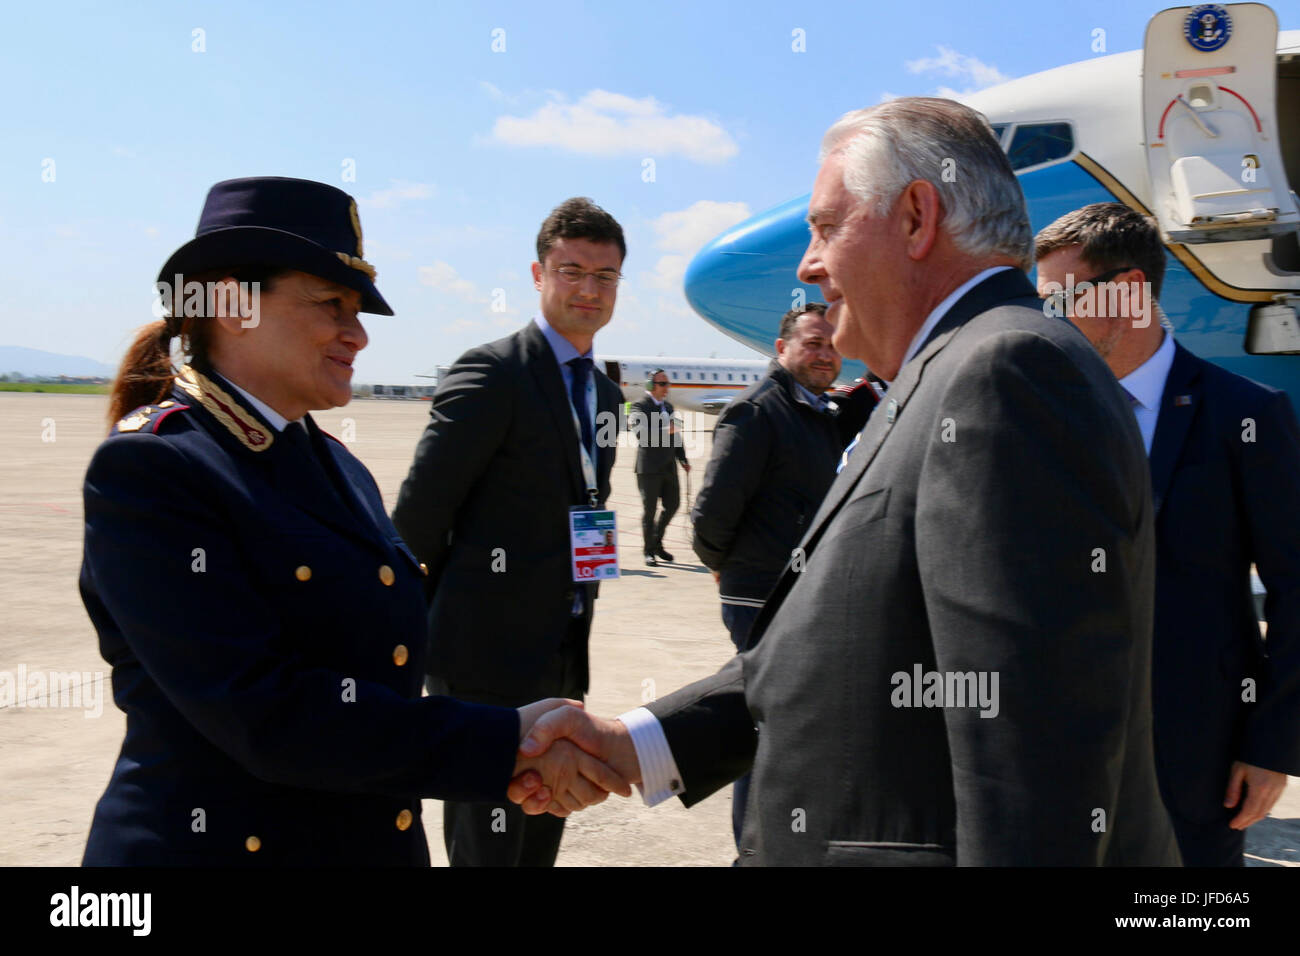 U.S. Secretary of State Rex Tillerson shakes hands with a member of the Italian armed forces at Pisa Military Airport before departing Italy en route to Moscow, Russia, on April 2017. Stock Photo